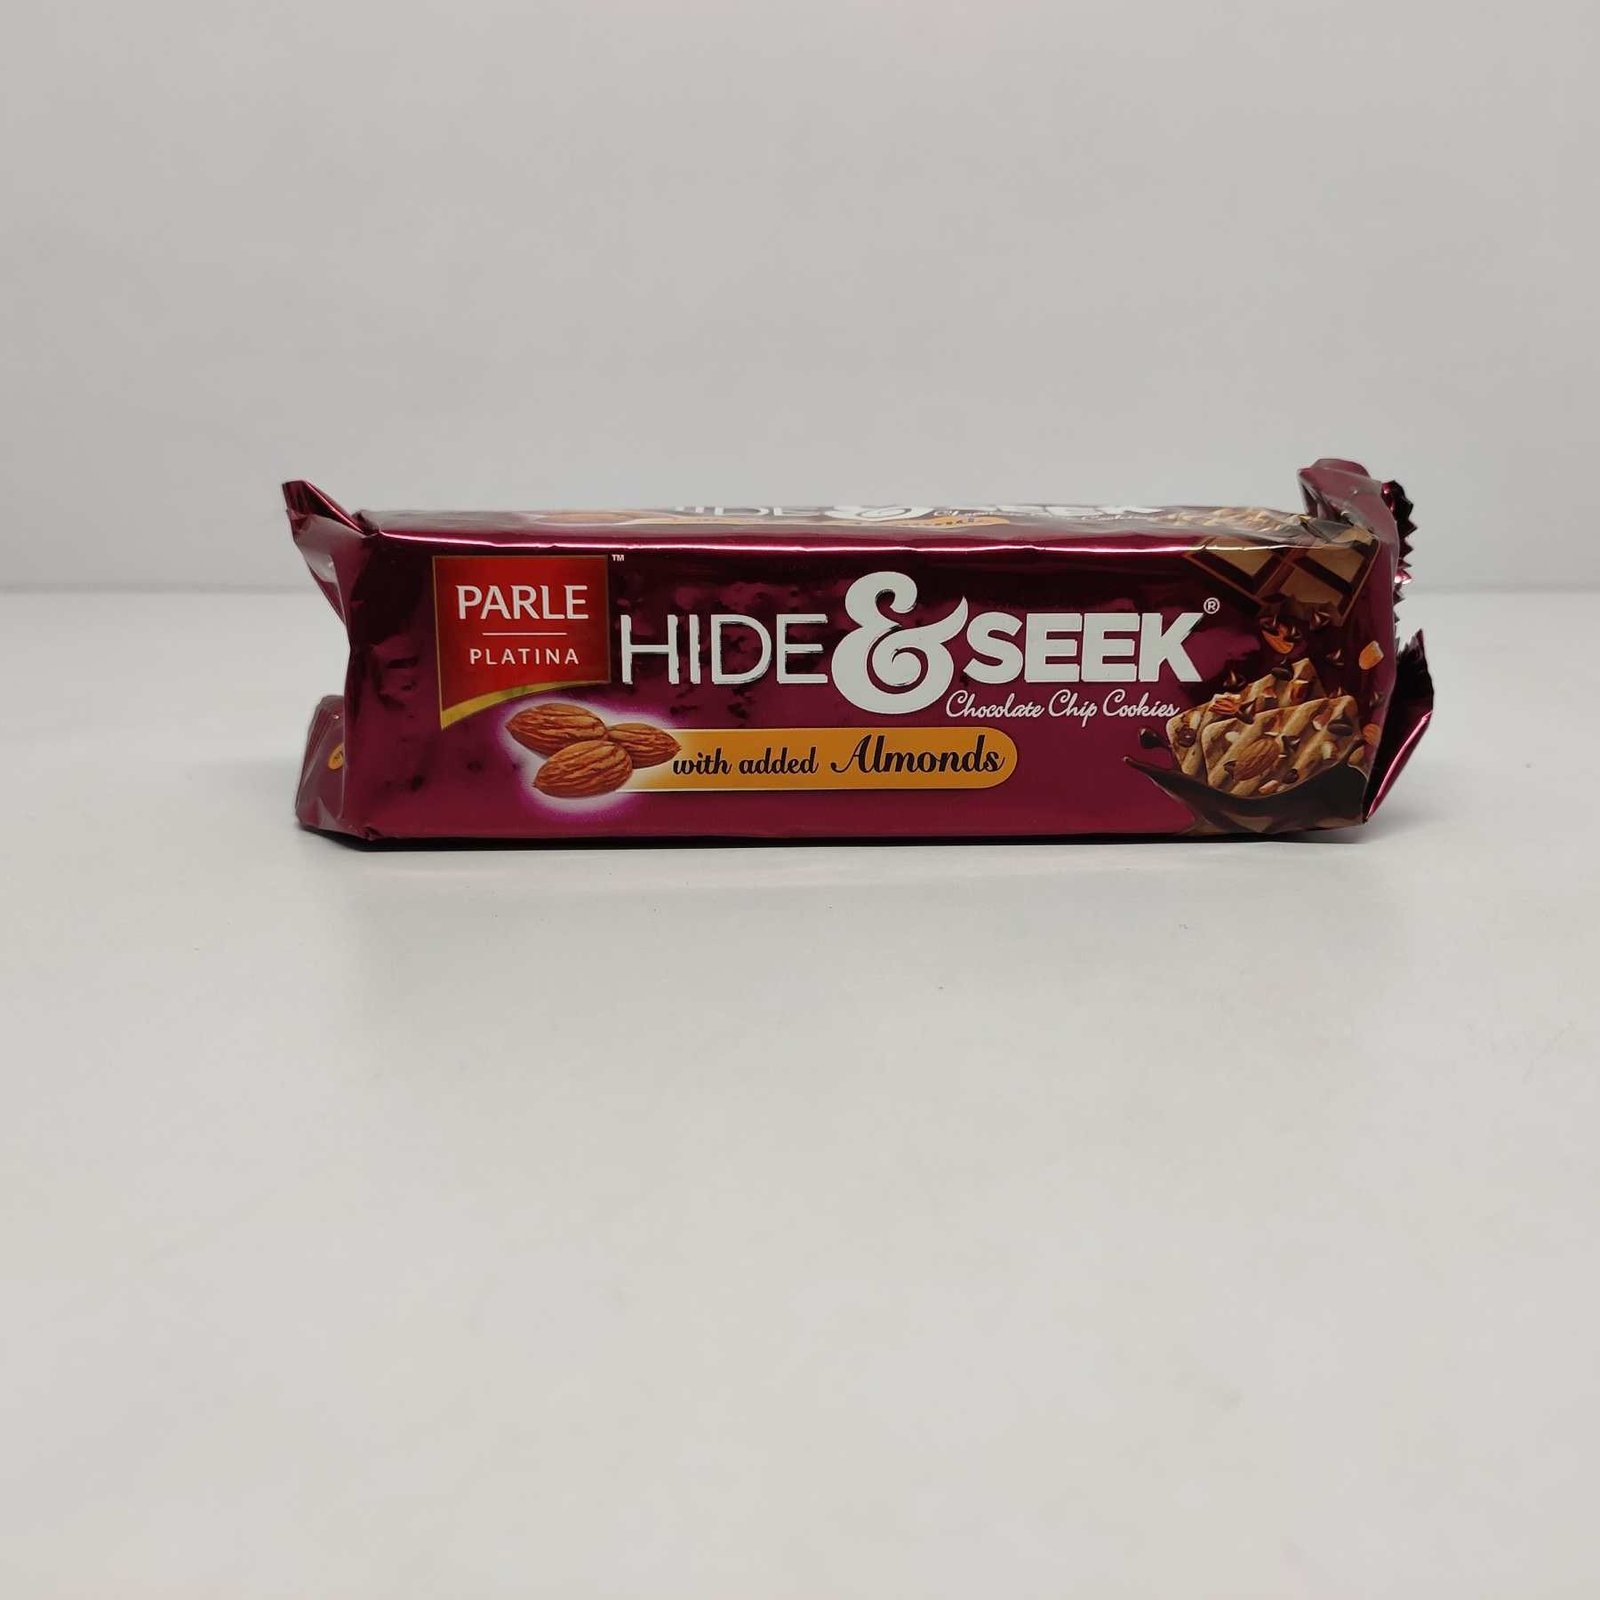 Parle Platina Hide and Seek choco chip cookies with added almonds, 100 grams